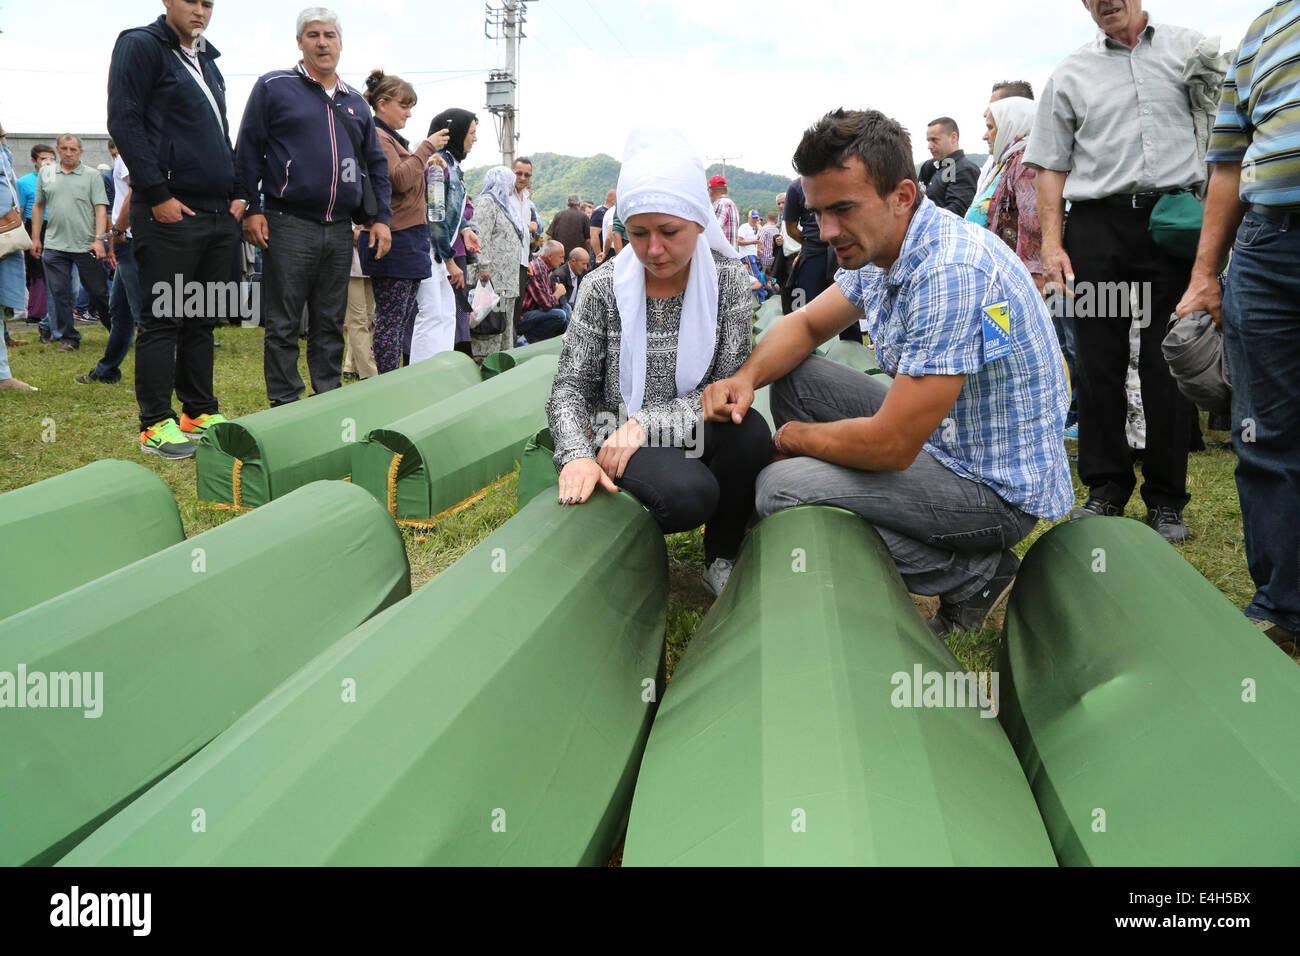 (140712) -- SREBRENICA, July 12, 2014 (Xinhua) -- Relatives sitting next to coffins of the victims mourn before a funeral in Potocari, near Srebrenica, Bosnia and Herzegovina, July 11, 2014. The funeral of 175 recently identified victims was held here Friday to commemorate the 19th anniversary of the Srebrenica massacre. Some 7,000 Muslim men and boys were massacred in and near Srebrenica by Bosnian Serb forces in July 1995, the worst massacre in Europe since the end of World War II. (Xinhua/Haris Memija) (zjl) Stock Photo